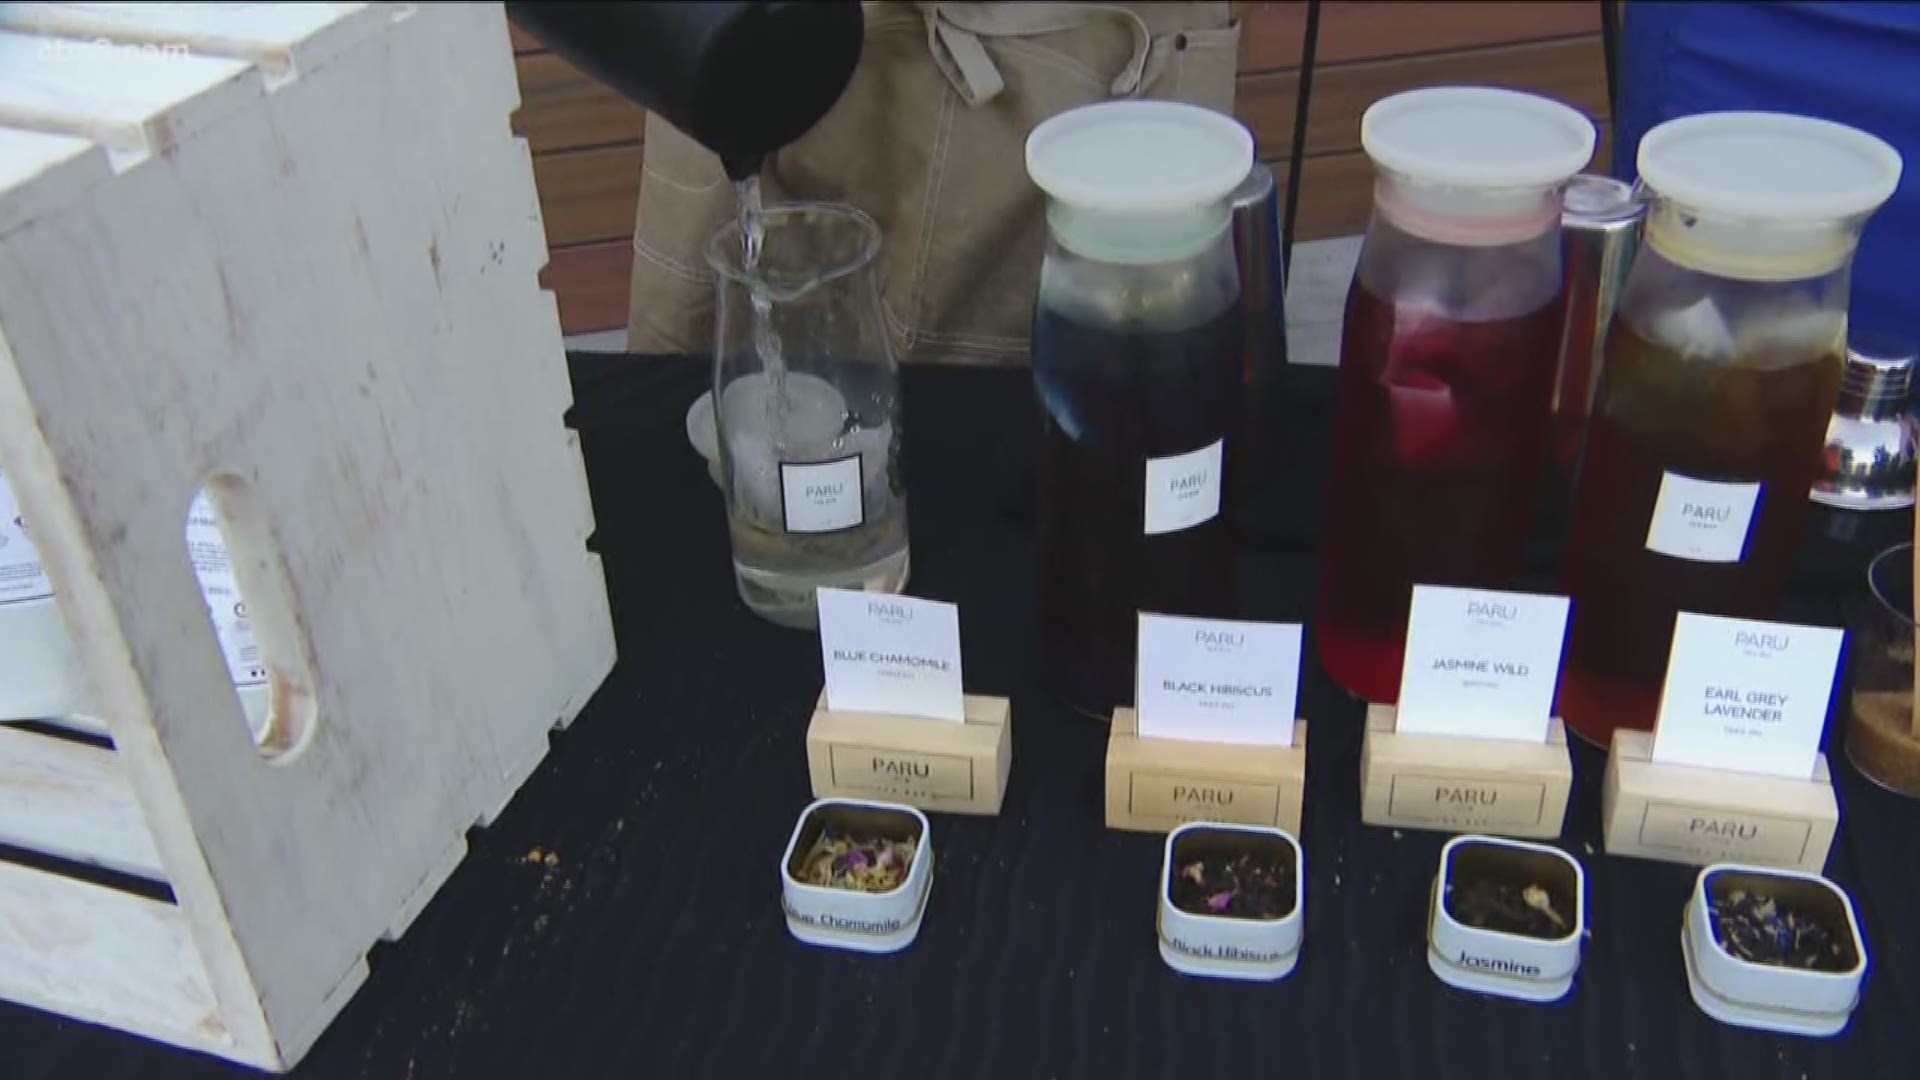 Amy Truong from Paru Tea Bar and Brianna Harris from VitaCup showed some of their fun, tasty teas.